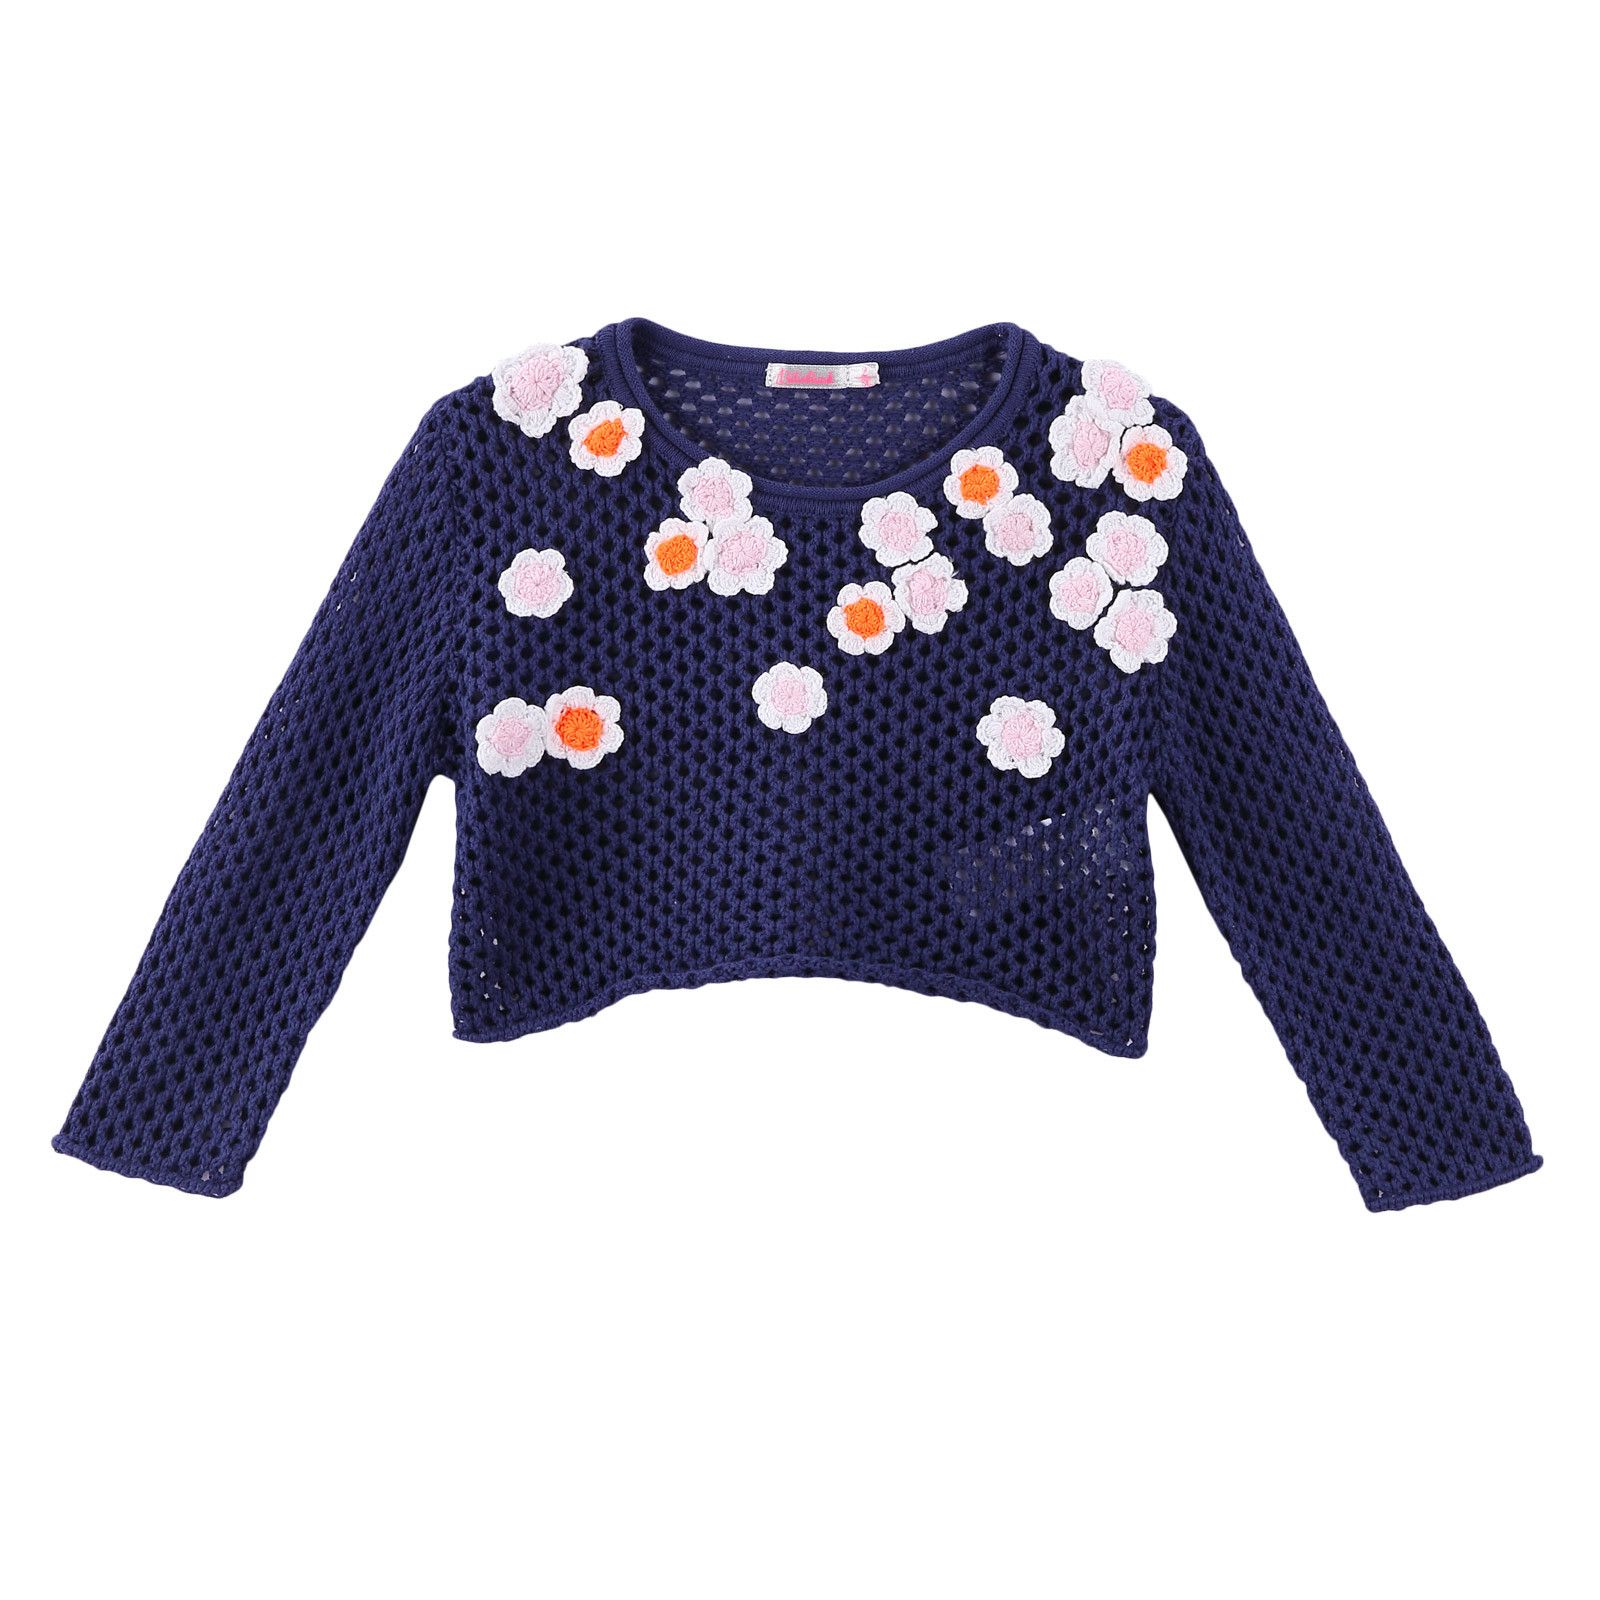 Girls Navy Blue Knitted Cotton Sweater With Patch Flower Trims - CÉMAROSE | Children's Fashion Store - 1